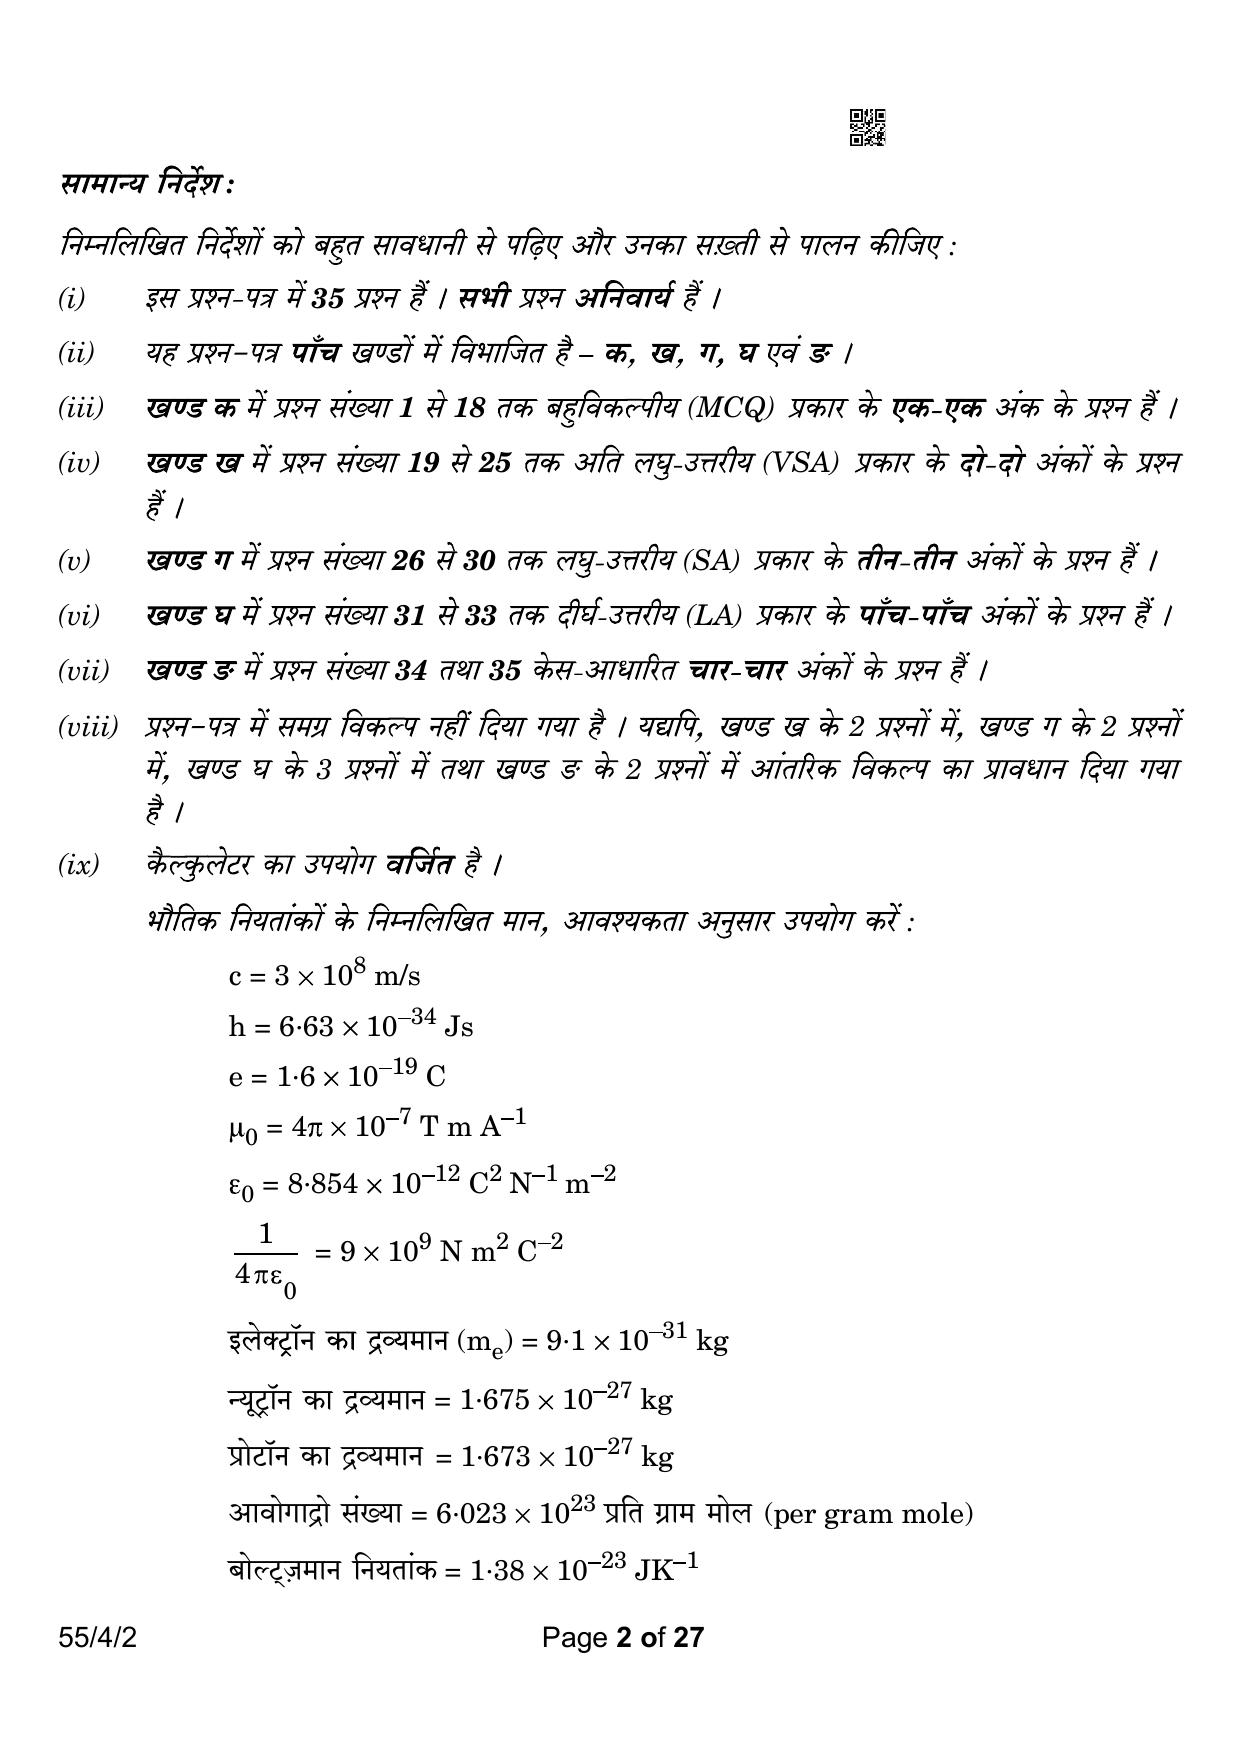 CBSE Class 12 55-4-2 Physics 2023 Question Paper - Page 2